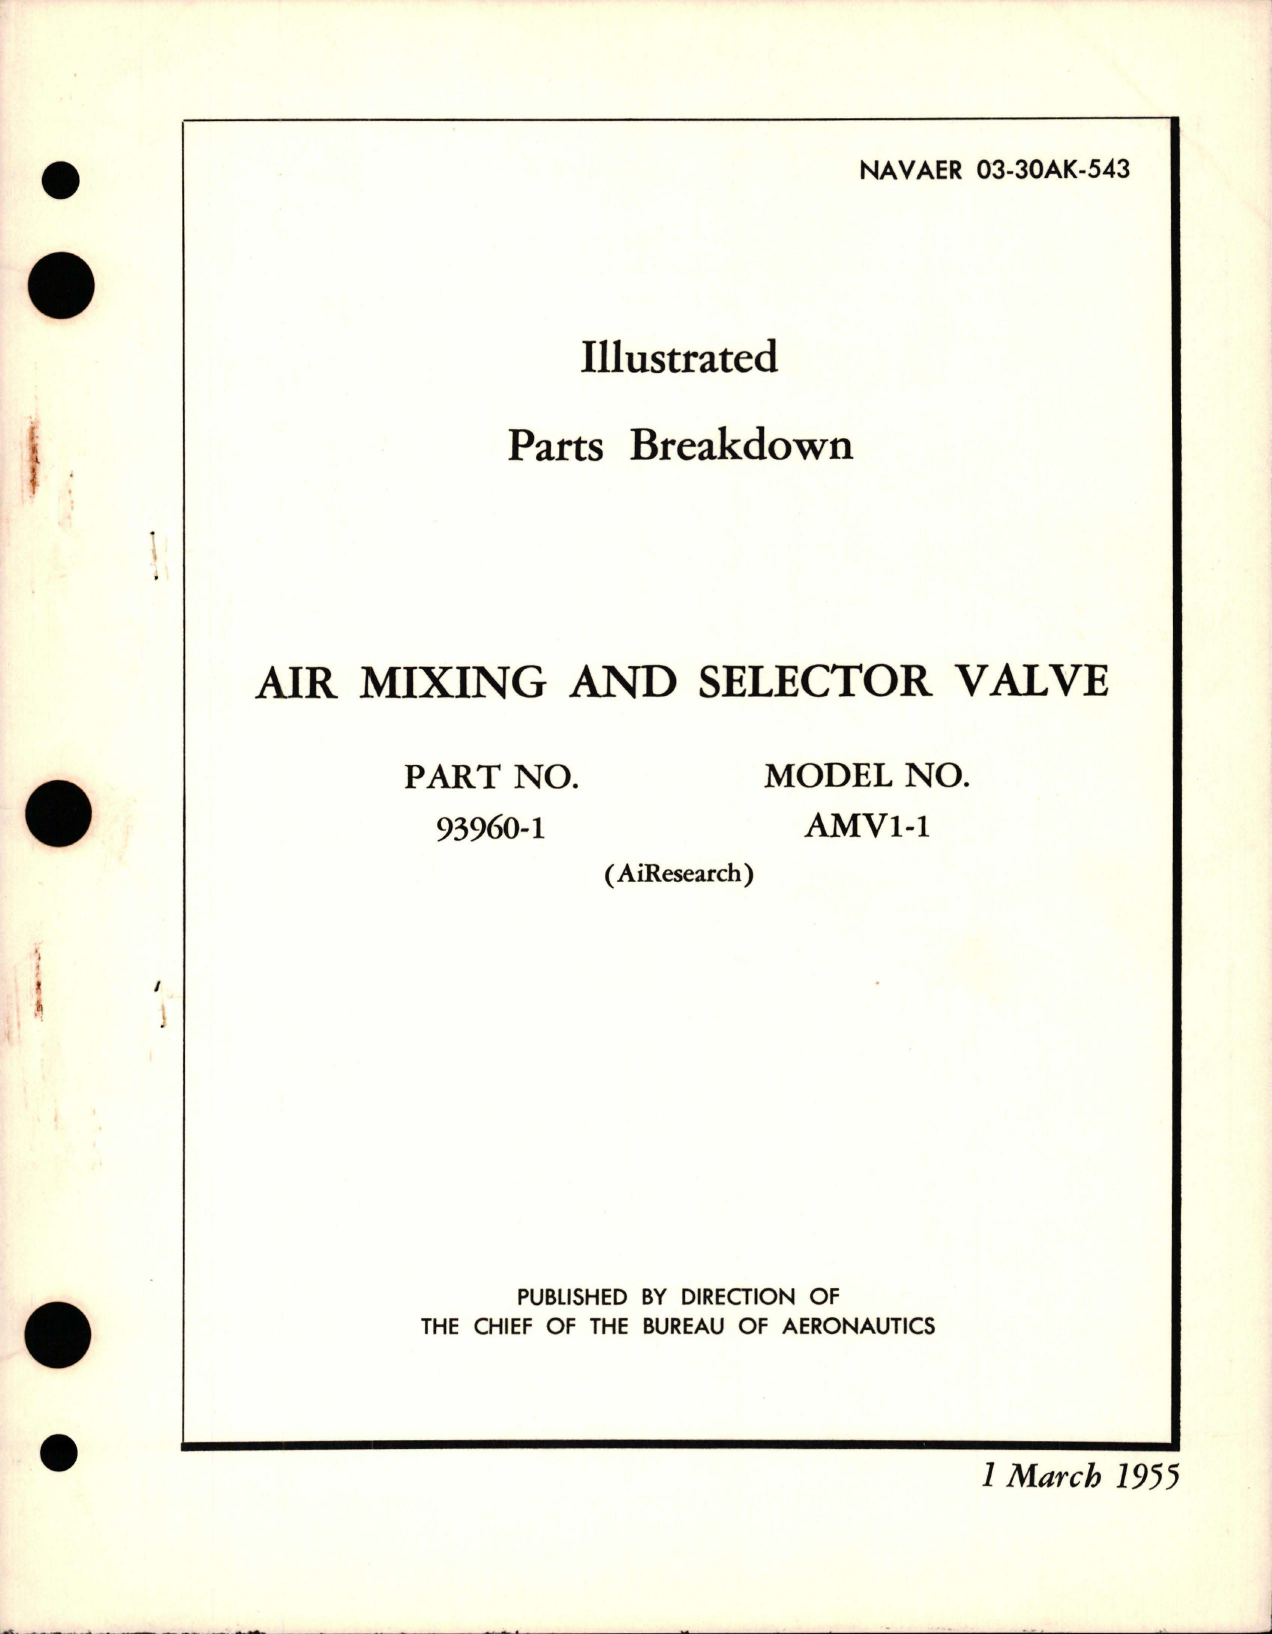 Sample page 1 from AirCorps Library document: Illustrated Parts Breakdown for Air Mixing and Selector Valve - Part 93960-1 - Model AMV1-1